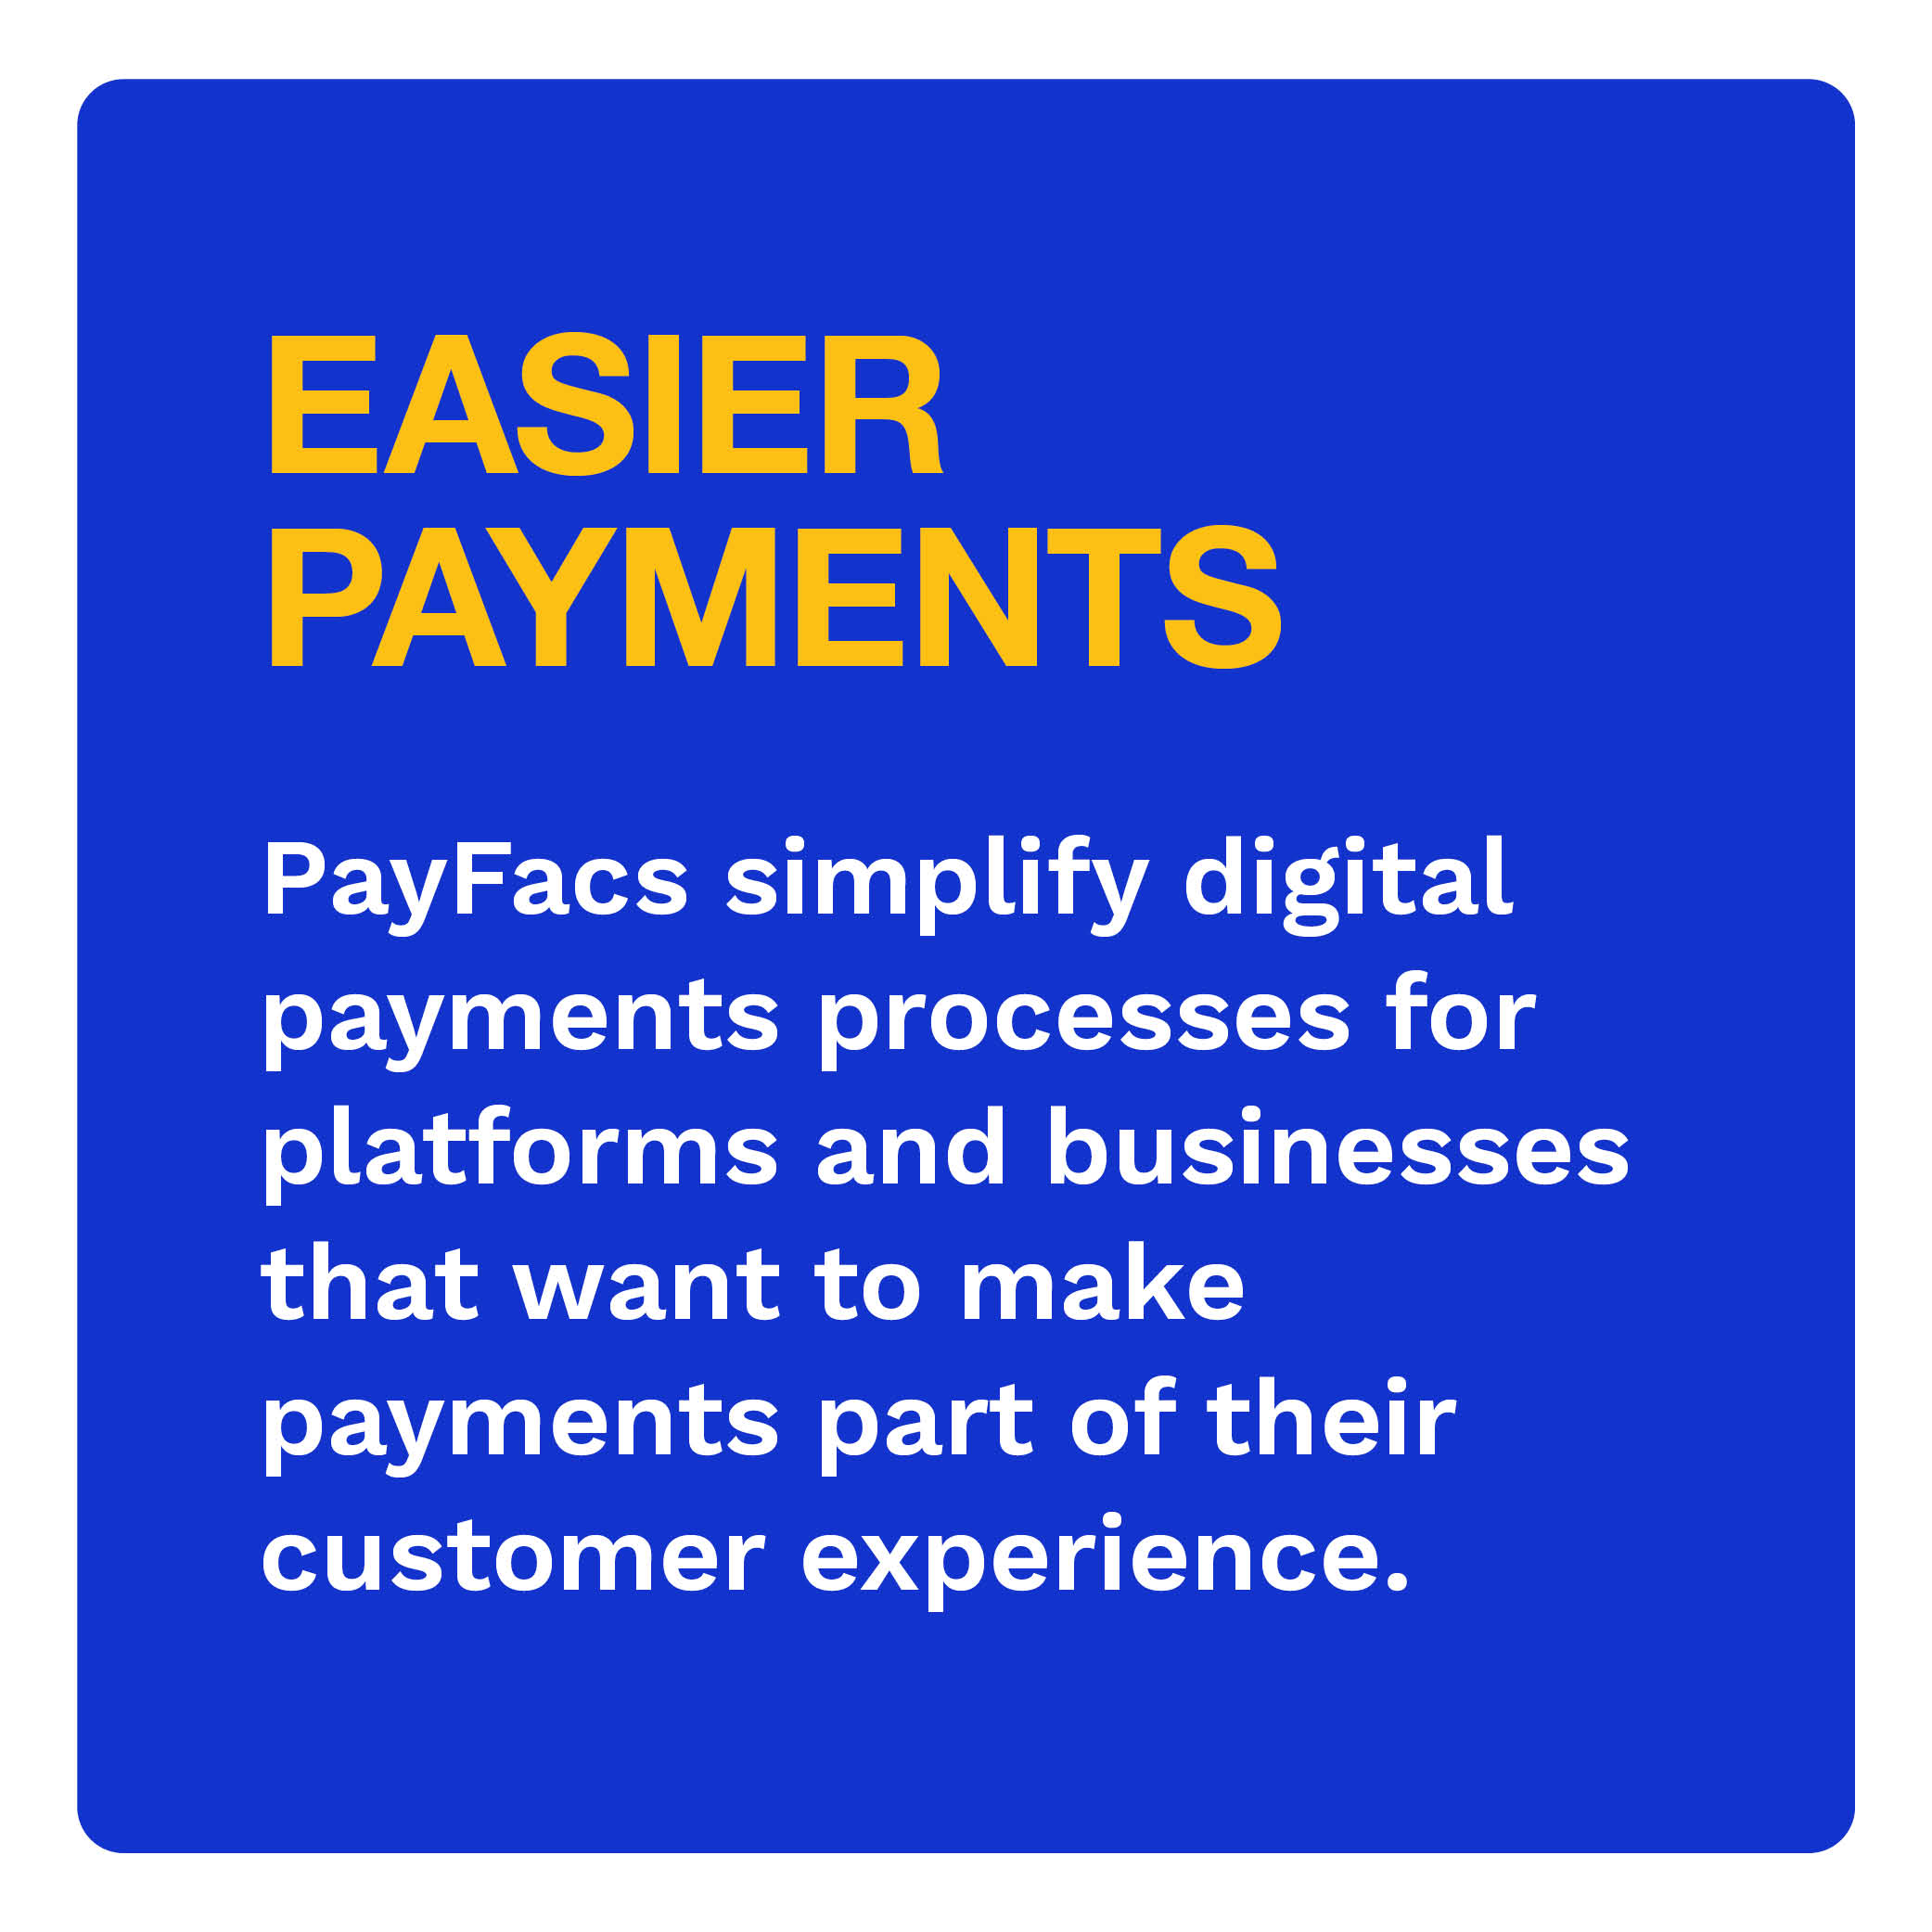 EASIER PAYMENTS: PayFacs simplify digital payments processes for platforms and businesses that want to make payments part of their customer experience.